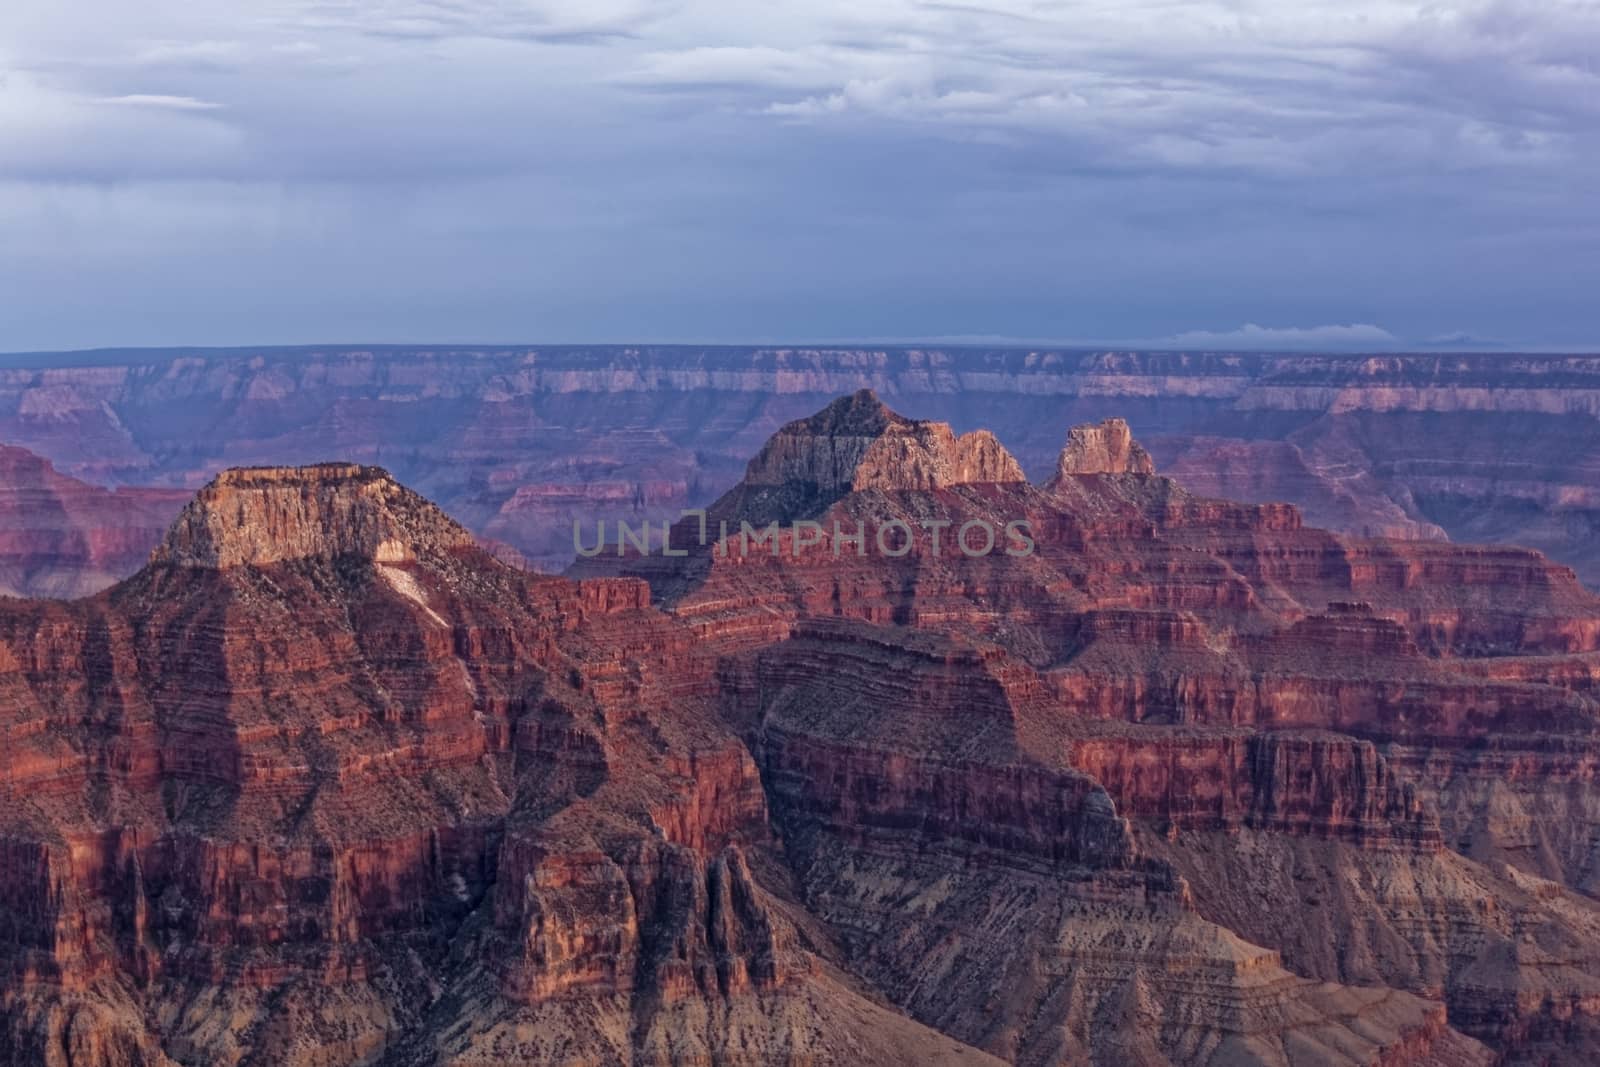 A view of the Grand Canyon from Bright Angel Point.